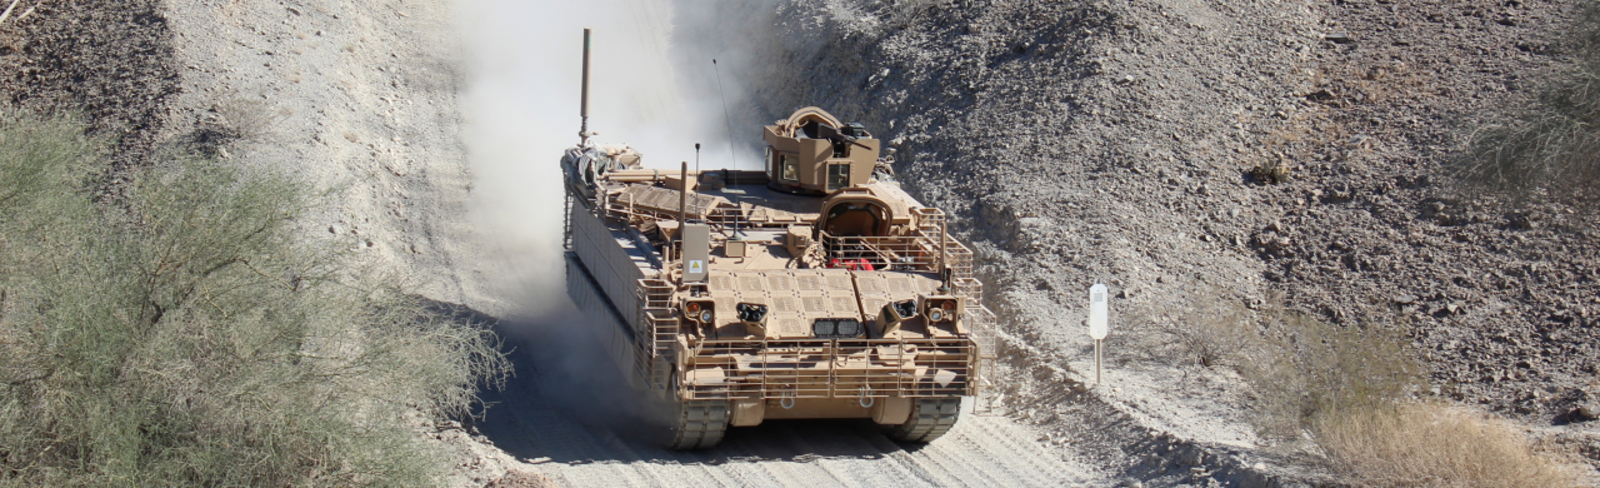 Image of the Armored Multi-Purpose Vehicle (AMPV) quickly traveling down a dirt road.